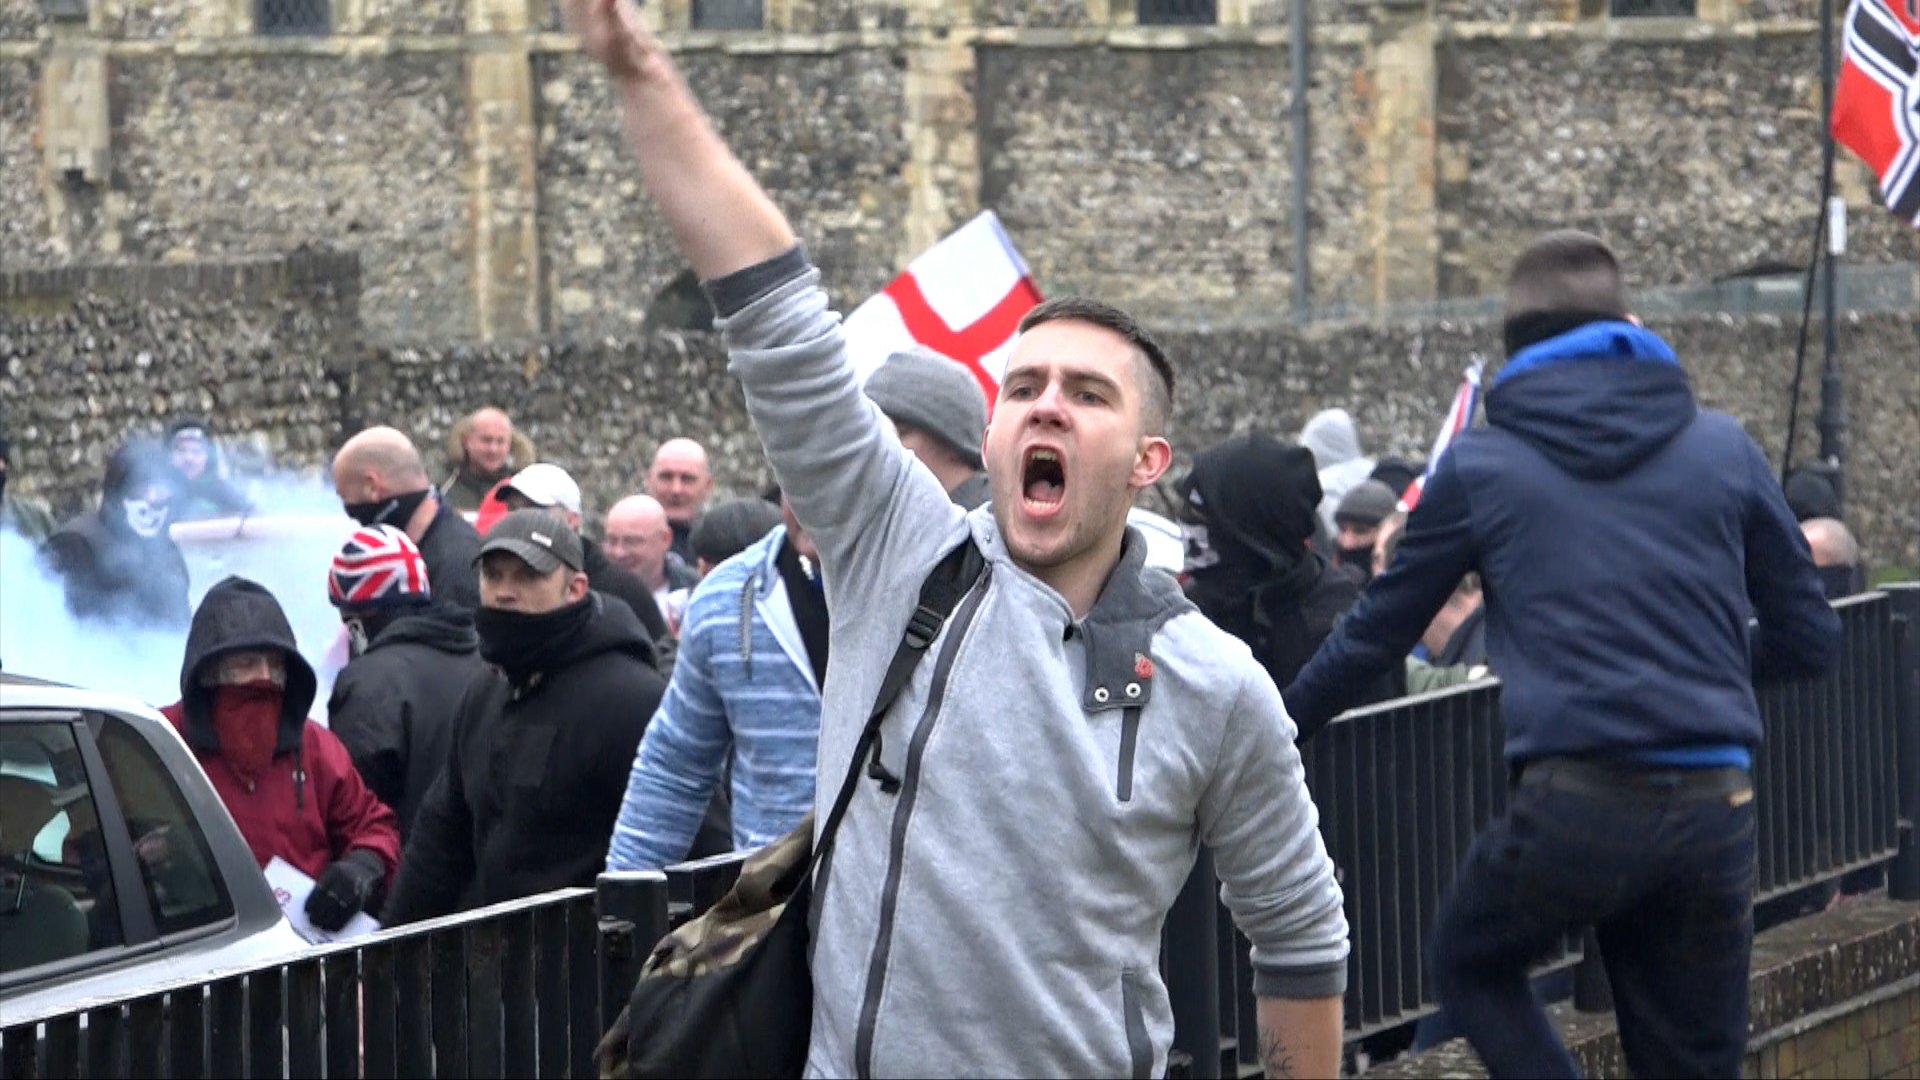 A member of the British far right giving a Nazi salute